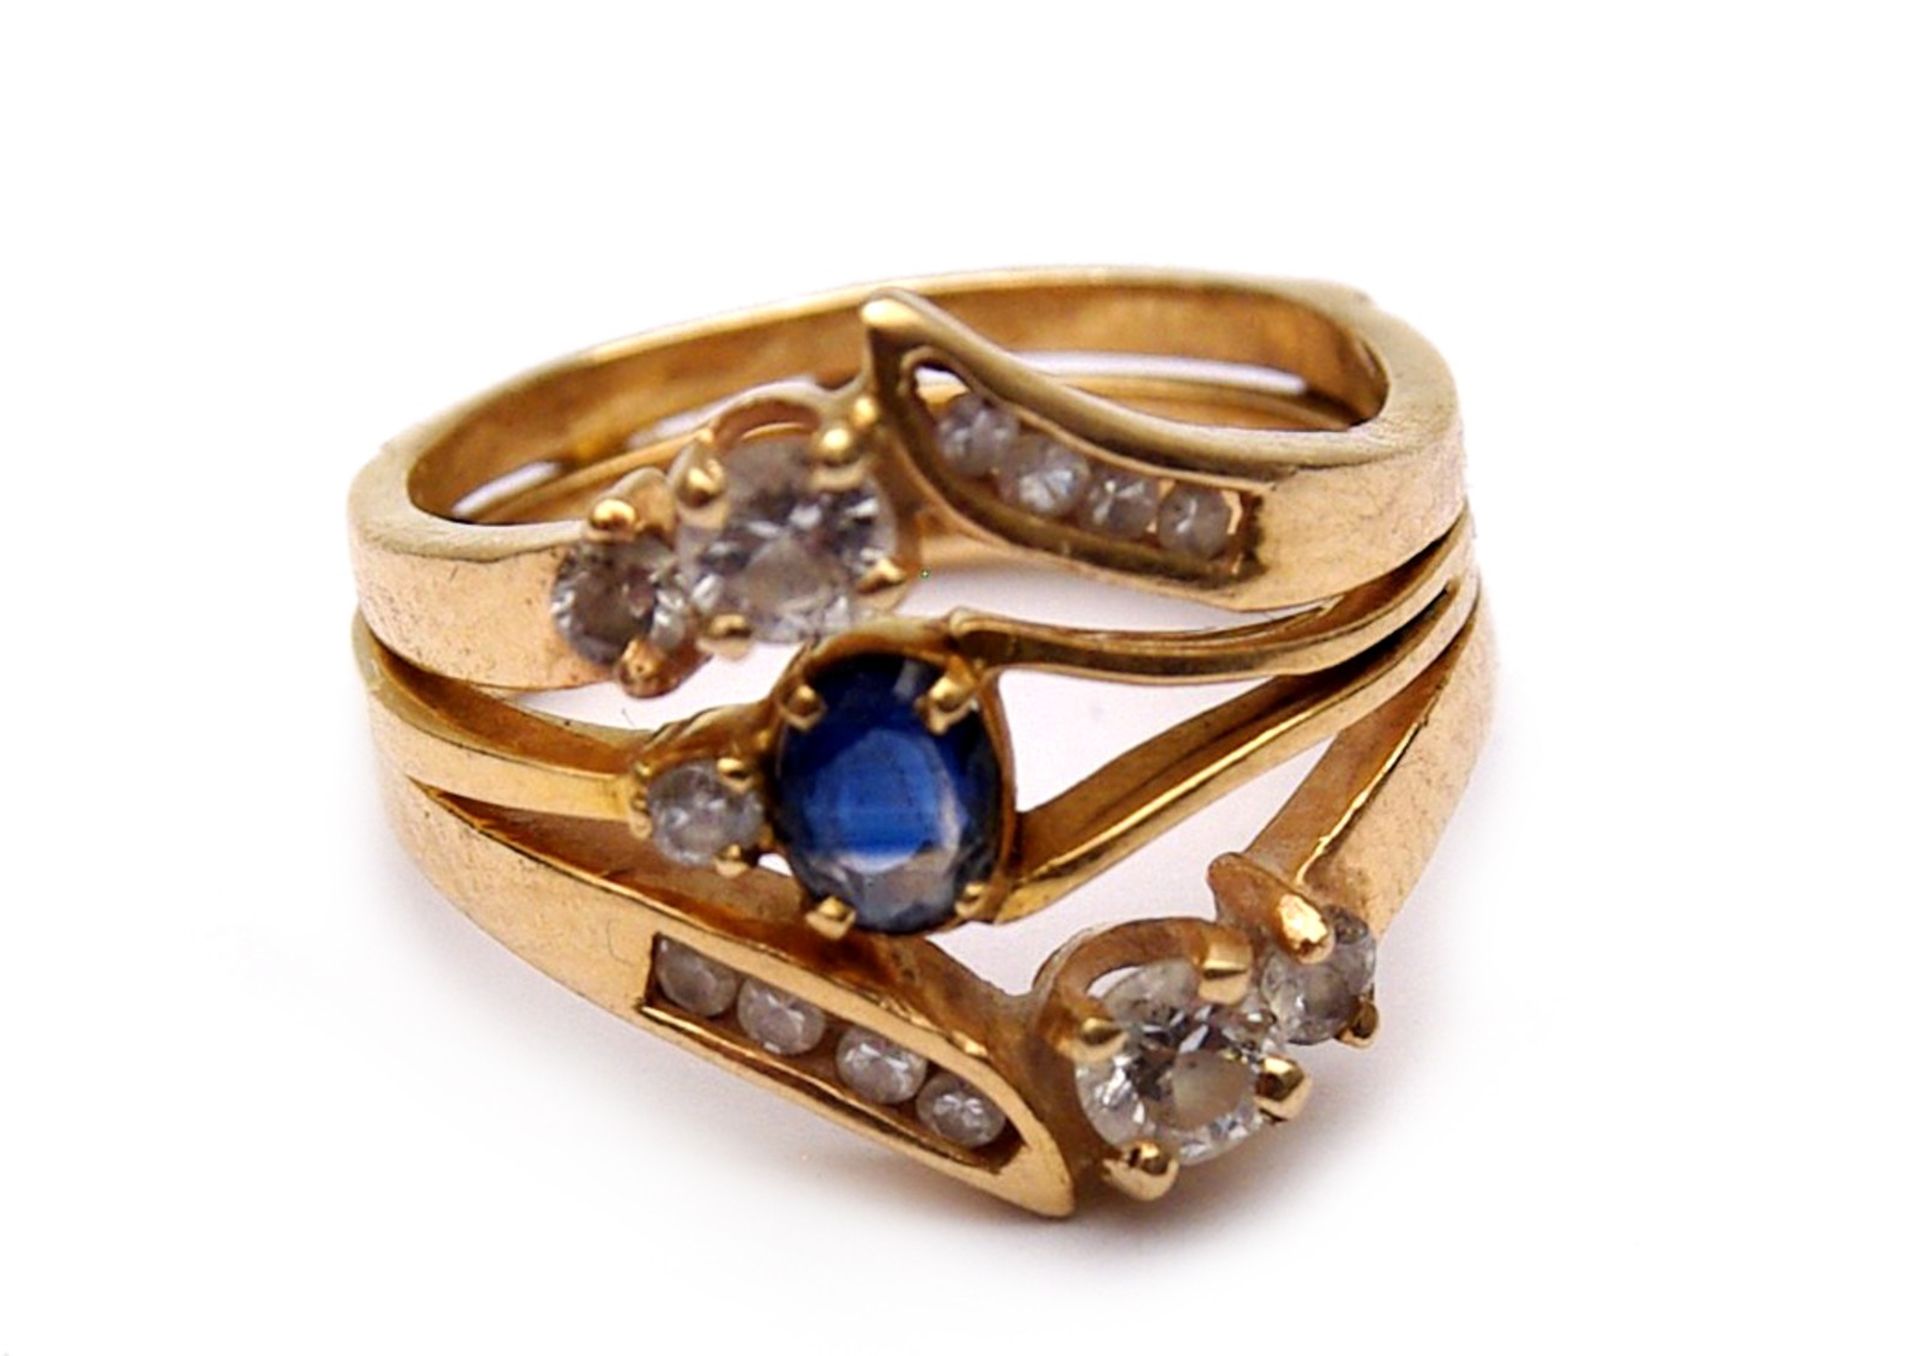 A blue sapphire and diamond ring